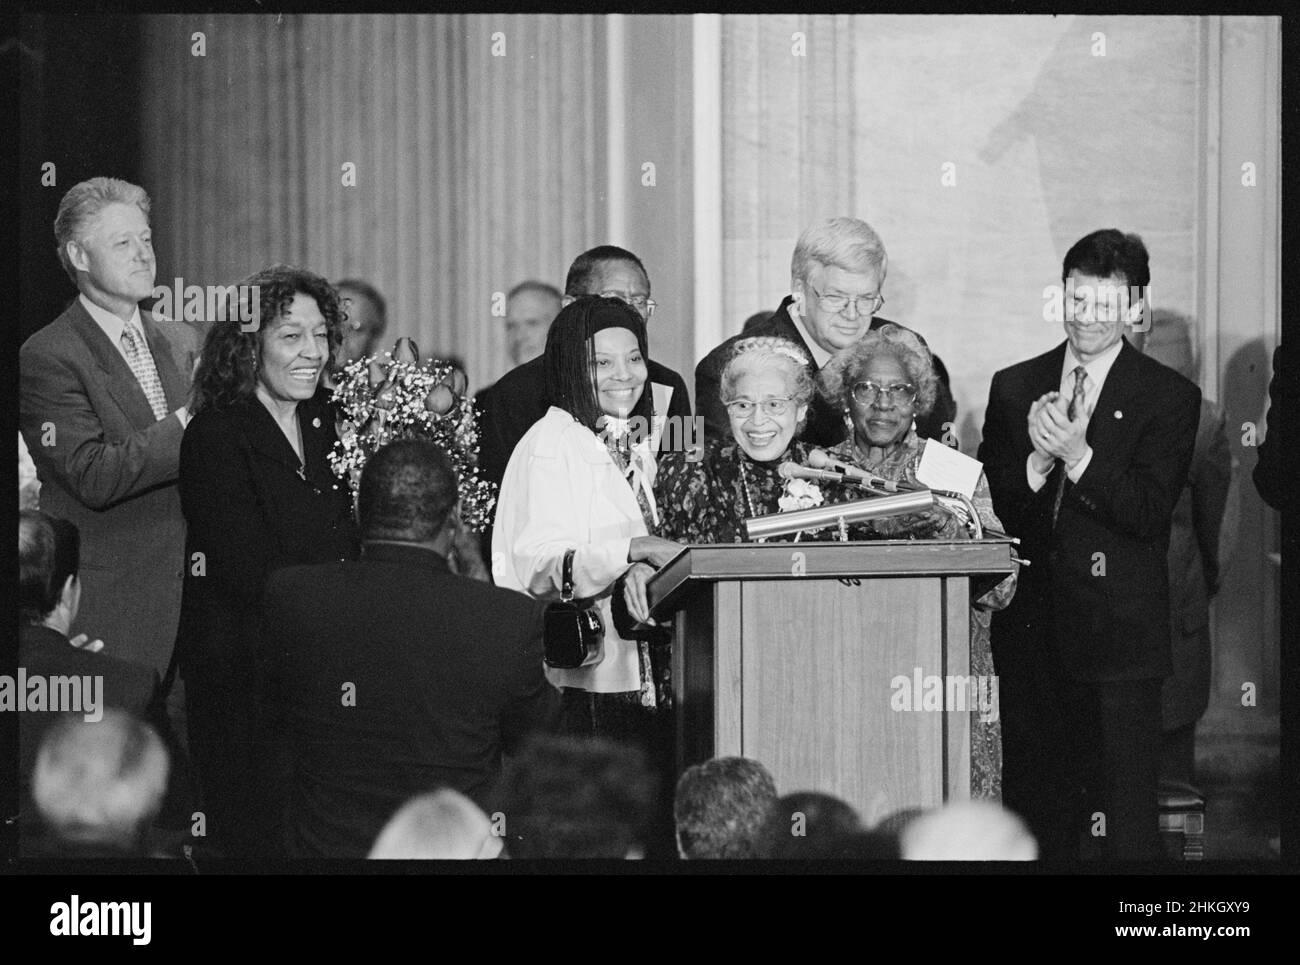 Rosa Parks at her Congressional Gold Medal ceremony with assistant Elaine Steele (left) and civil rights leader Johnnie Carr (right) standing at podium; Representative Julia Carson, President Clinton, Senator Tom Daschle, Representative Dennis Hastert and others stand next to her, Washington, DC, 6/15/1999. Stock Photo